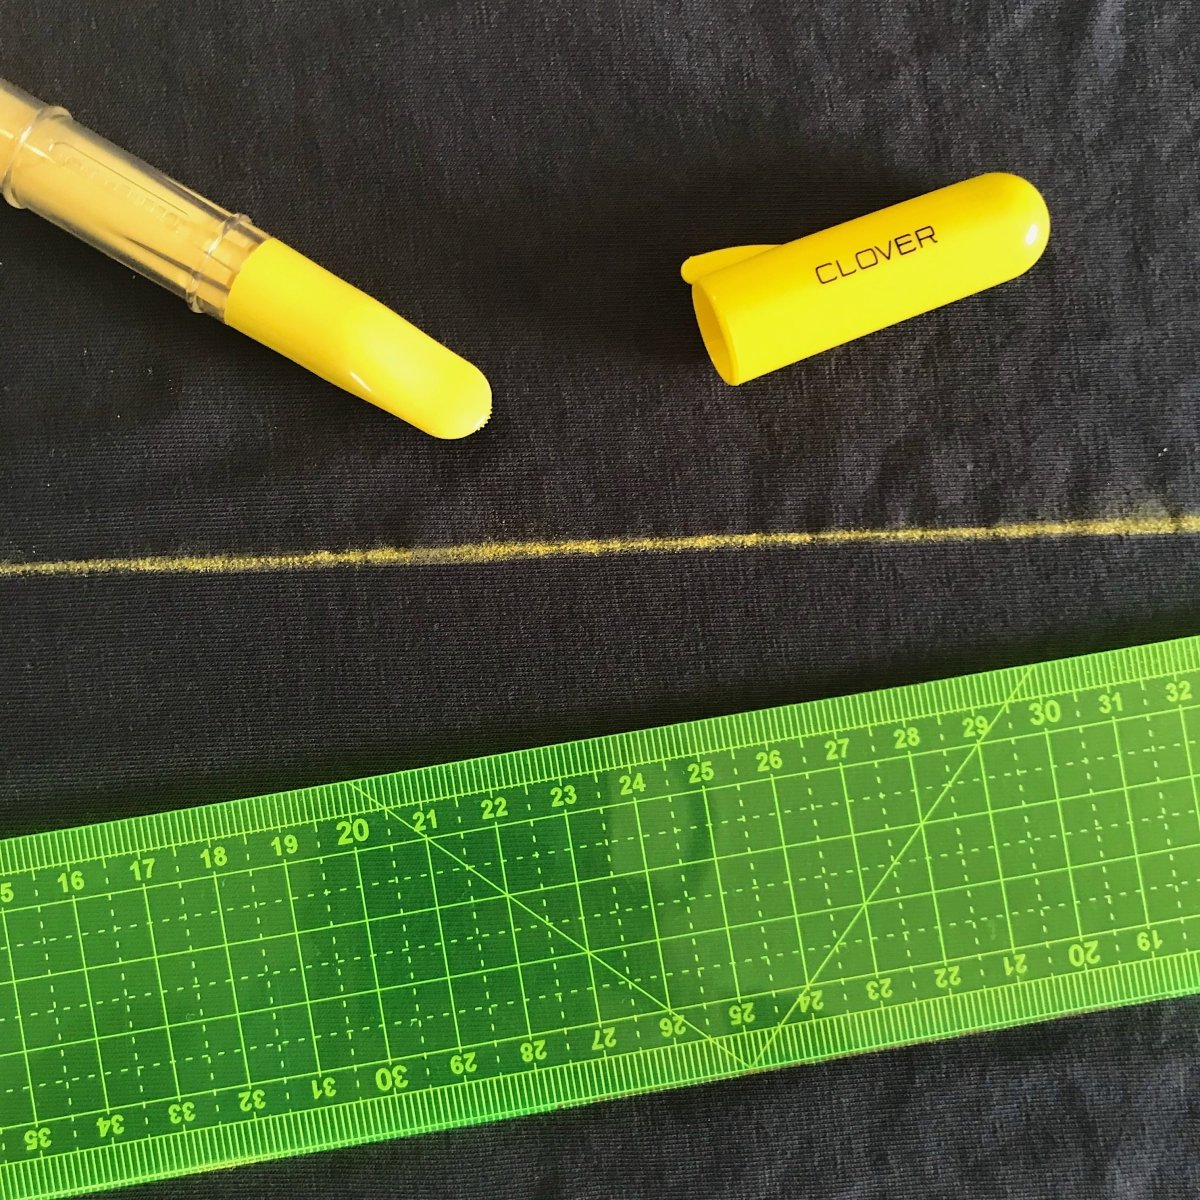 Marking Pens - What's Best? – Sewing Gem